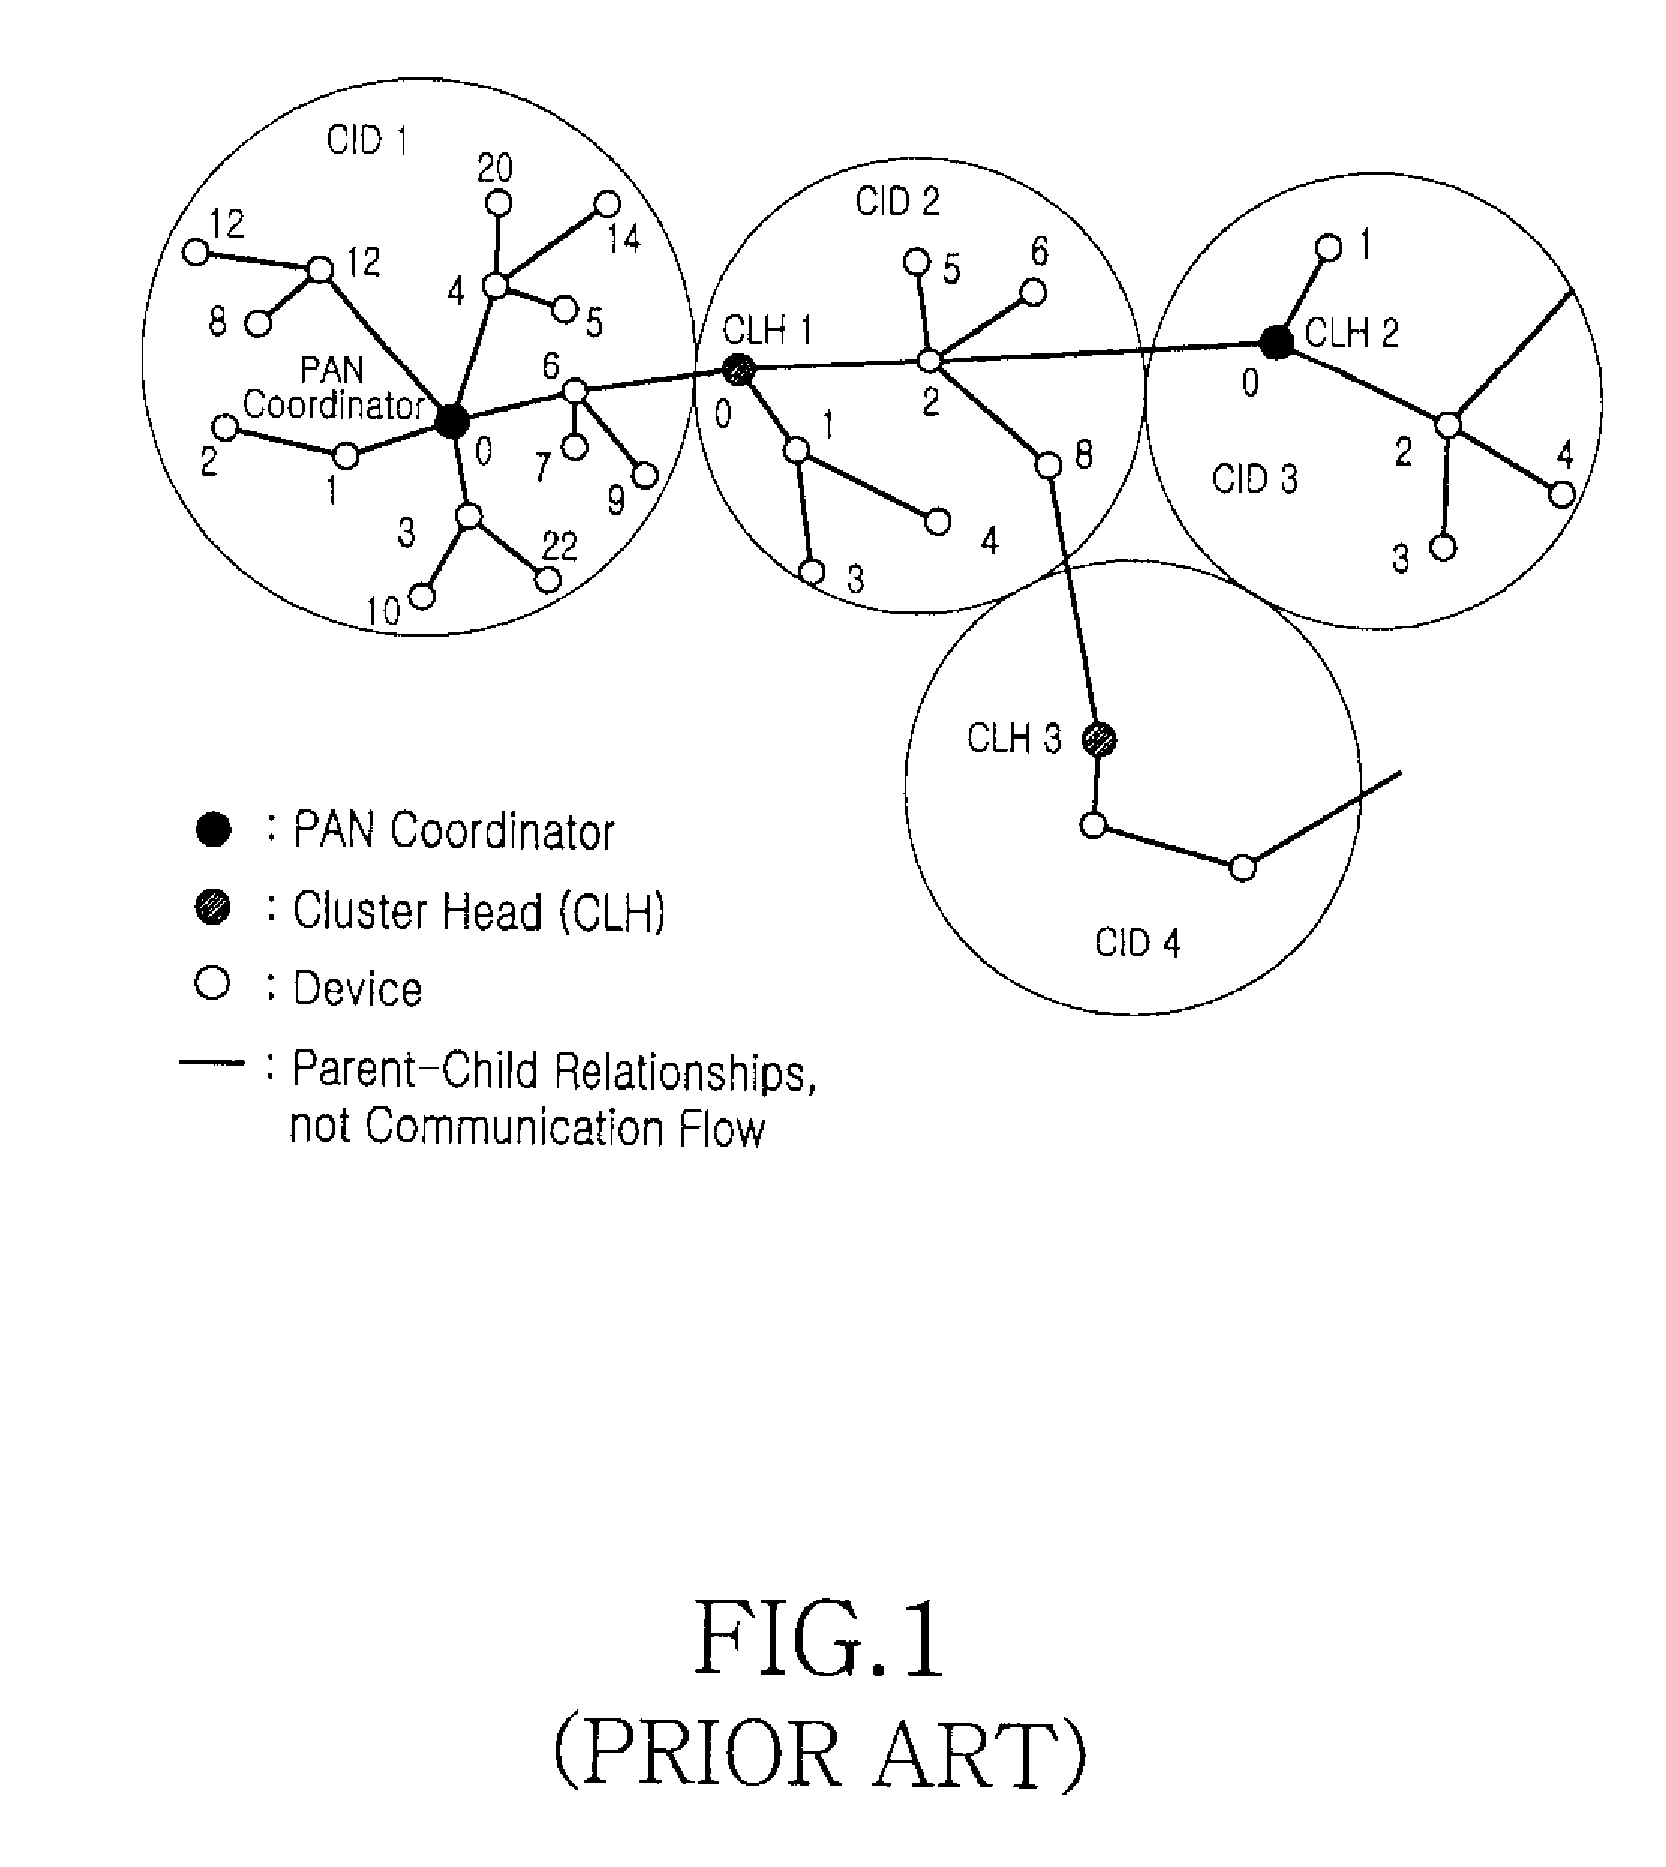 Method for transmitting/receiving data with transfer obligation delegated in wsn